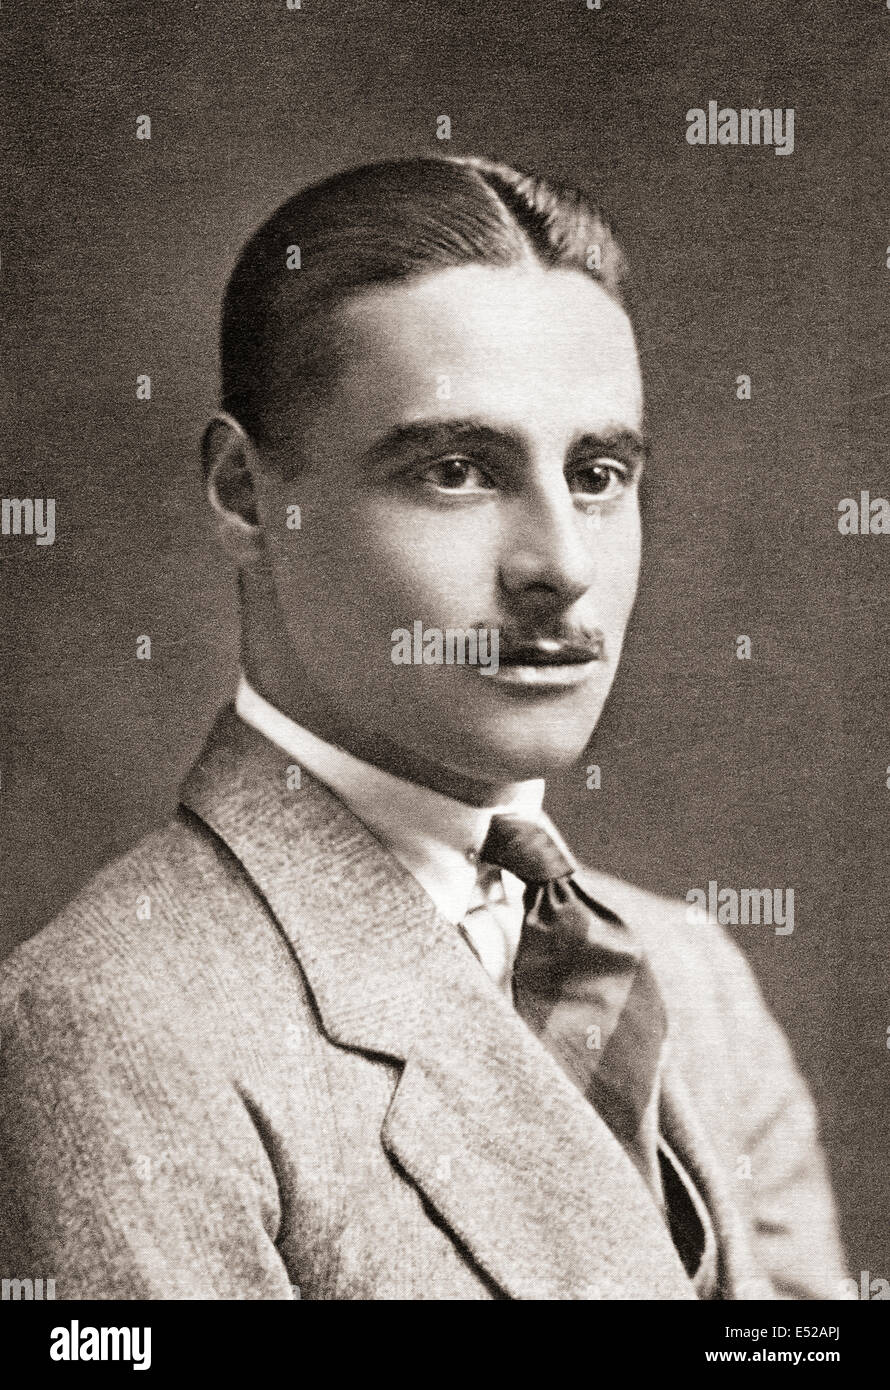 The Honourable Colwyn Erasmus Arnold Philips, 1888-1915. Captain in the Royal Horse Guards and poet of World War I. Stock Photo